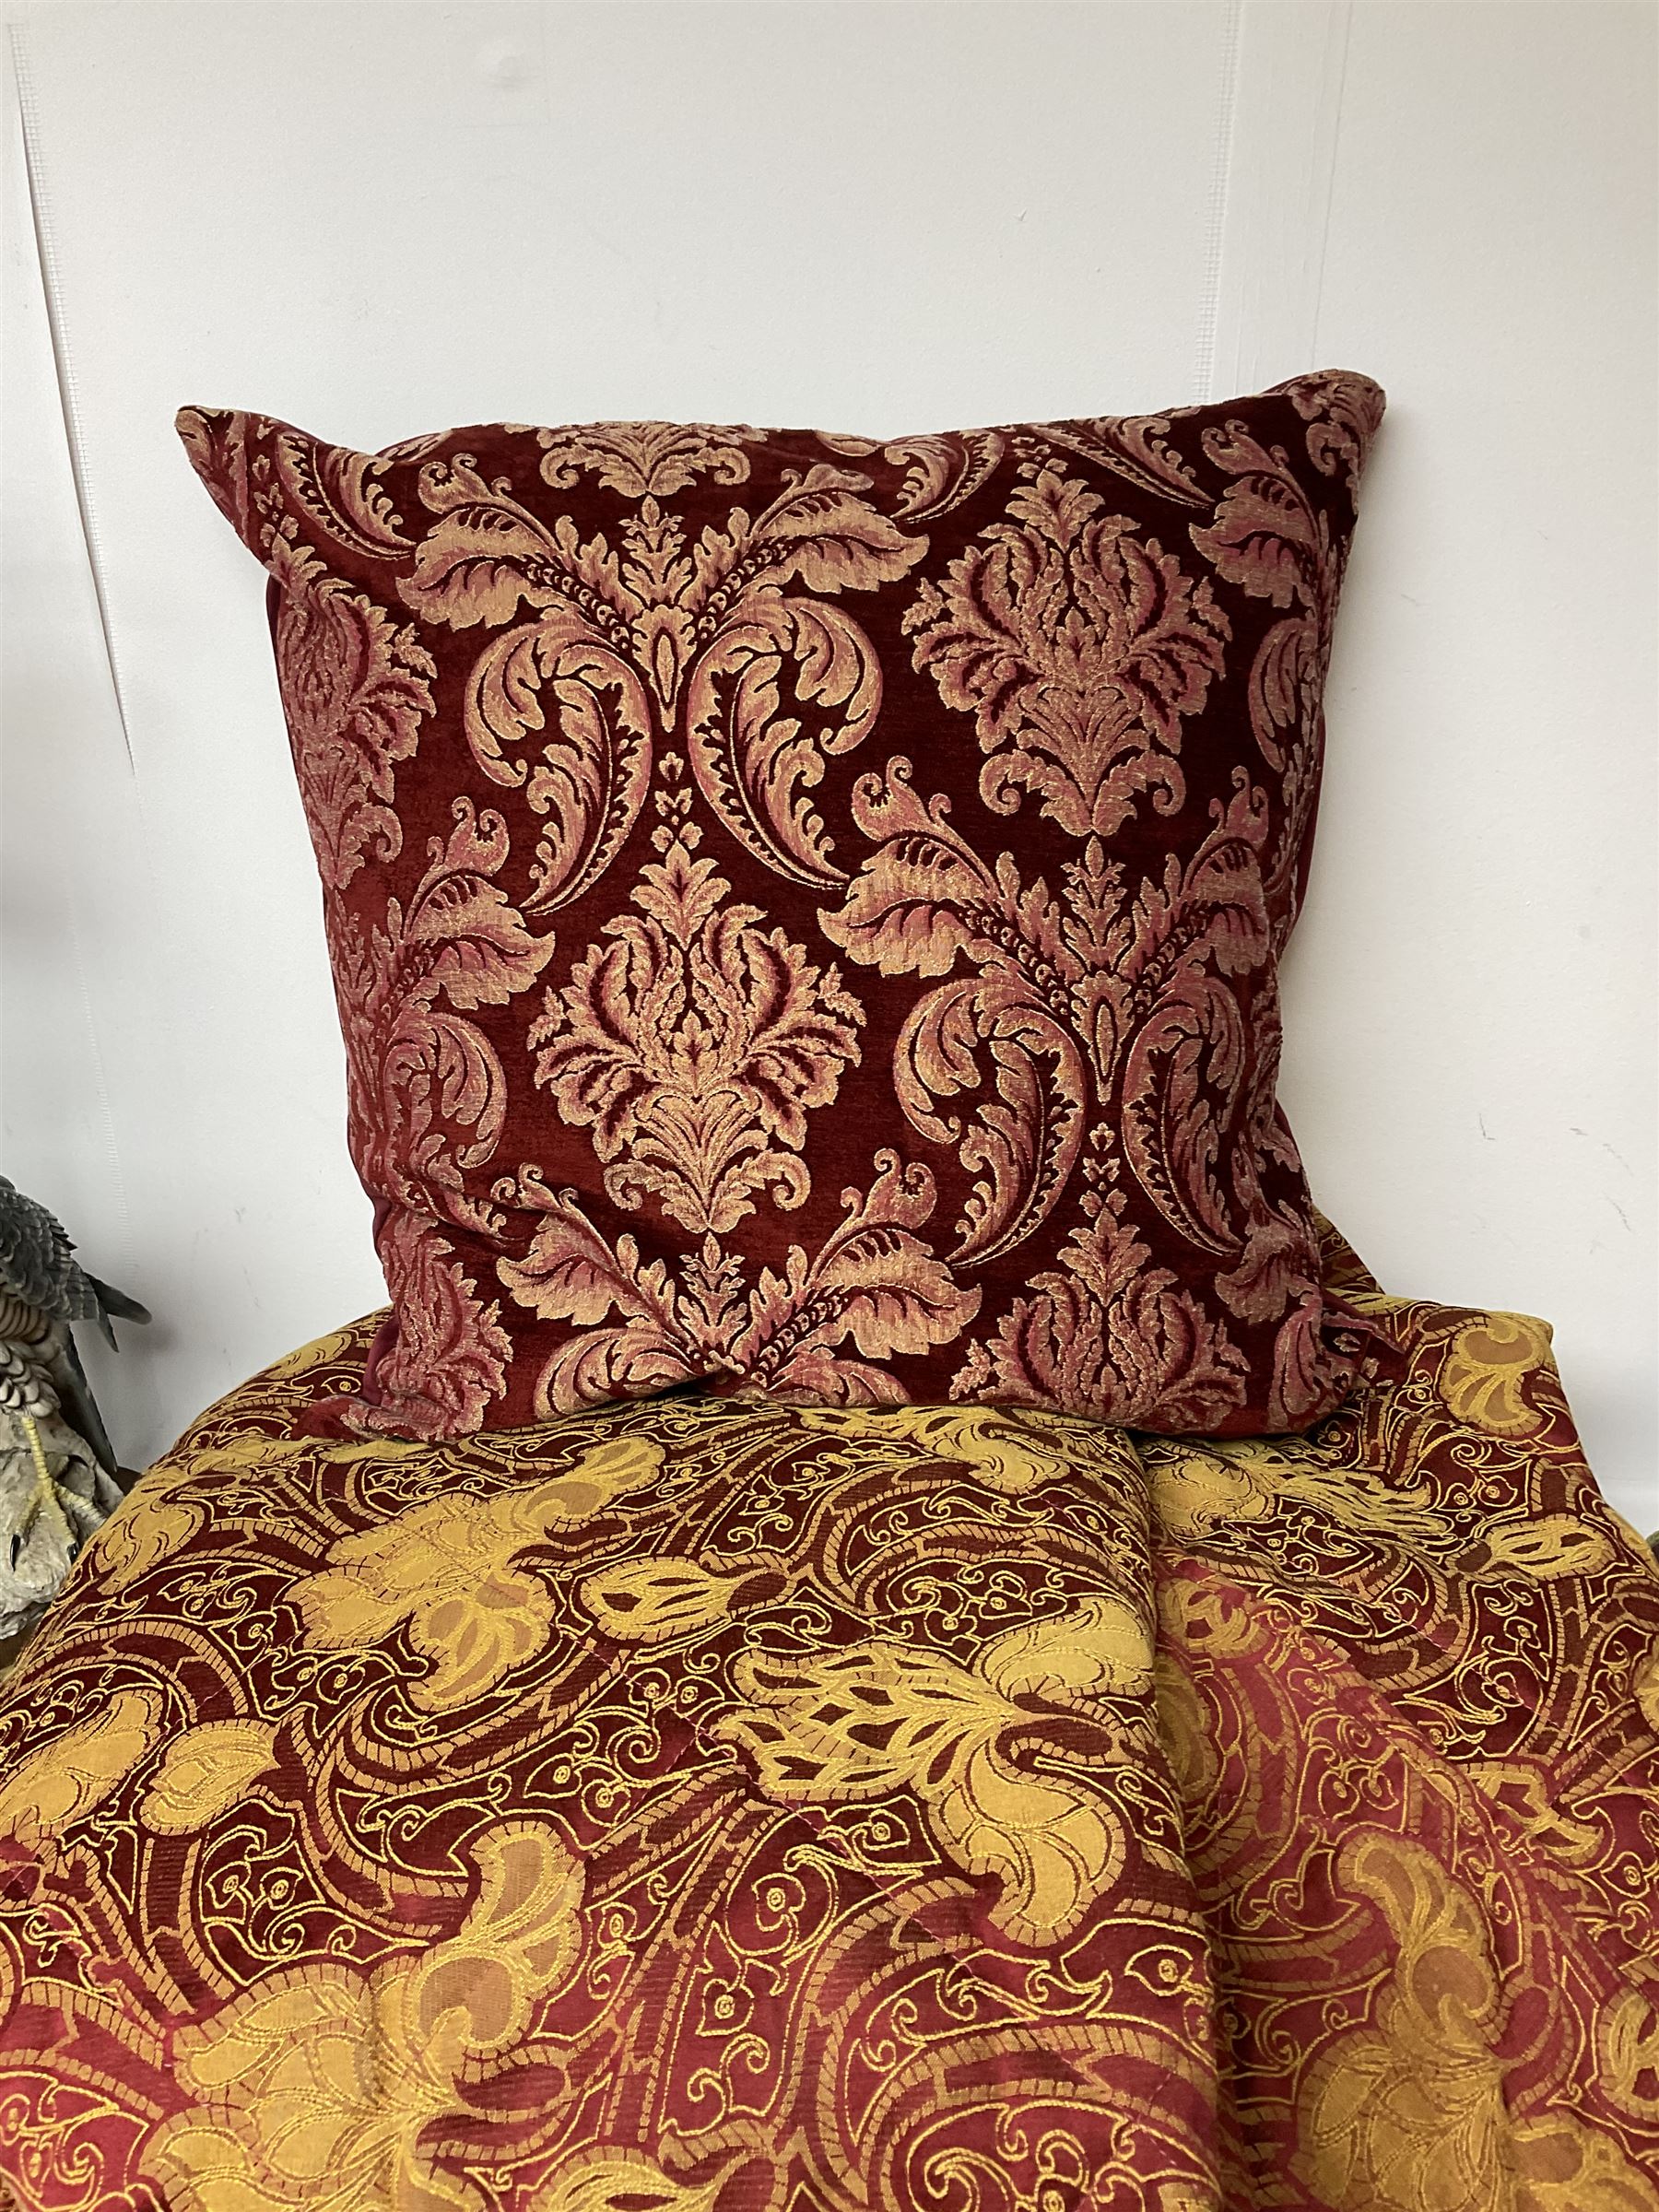 Quilted red and gold bedspread by Sandersons - Image 4 of 5